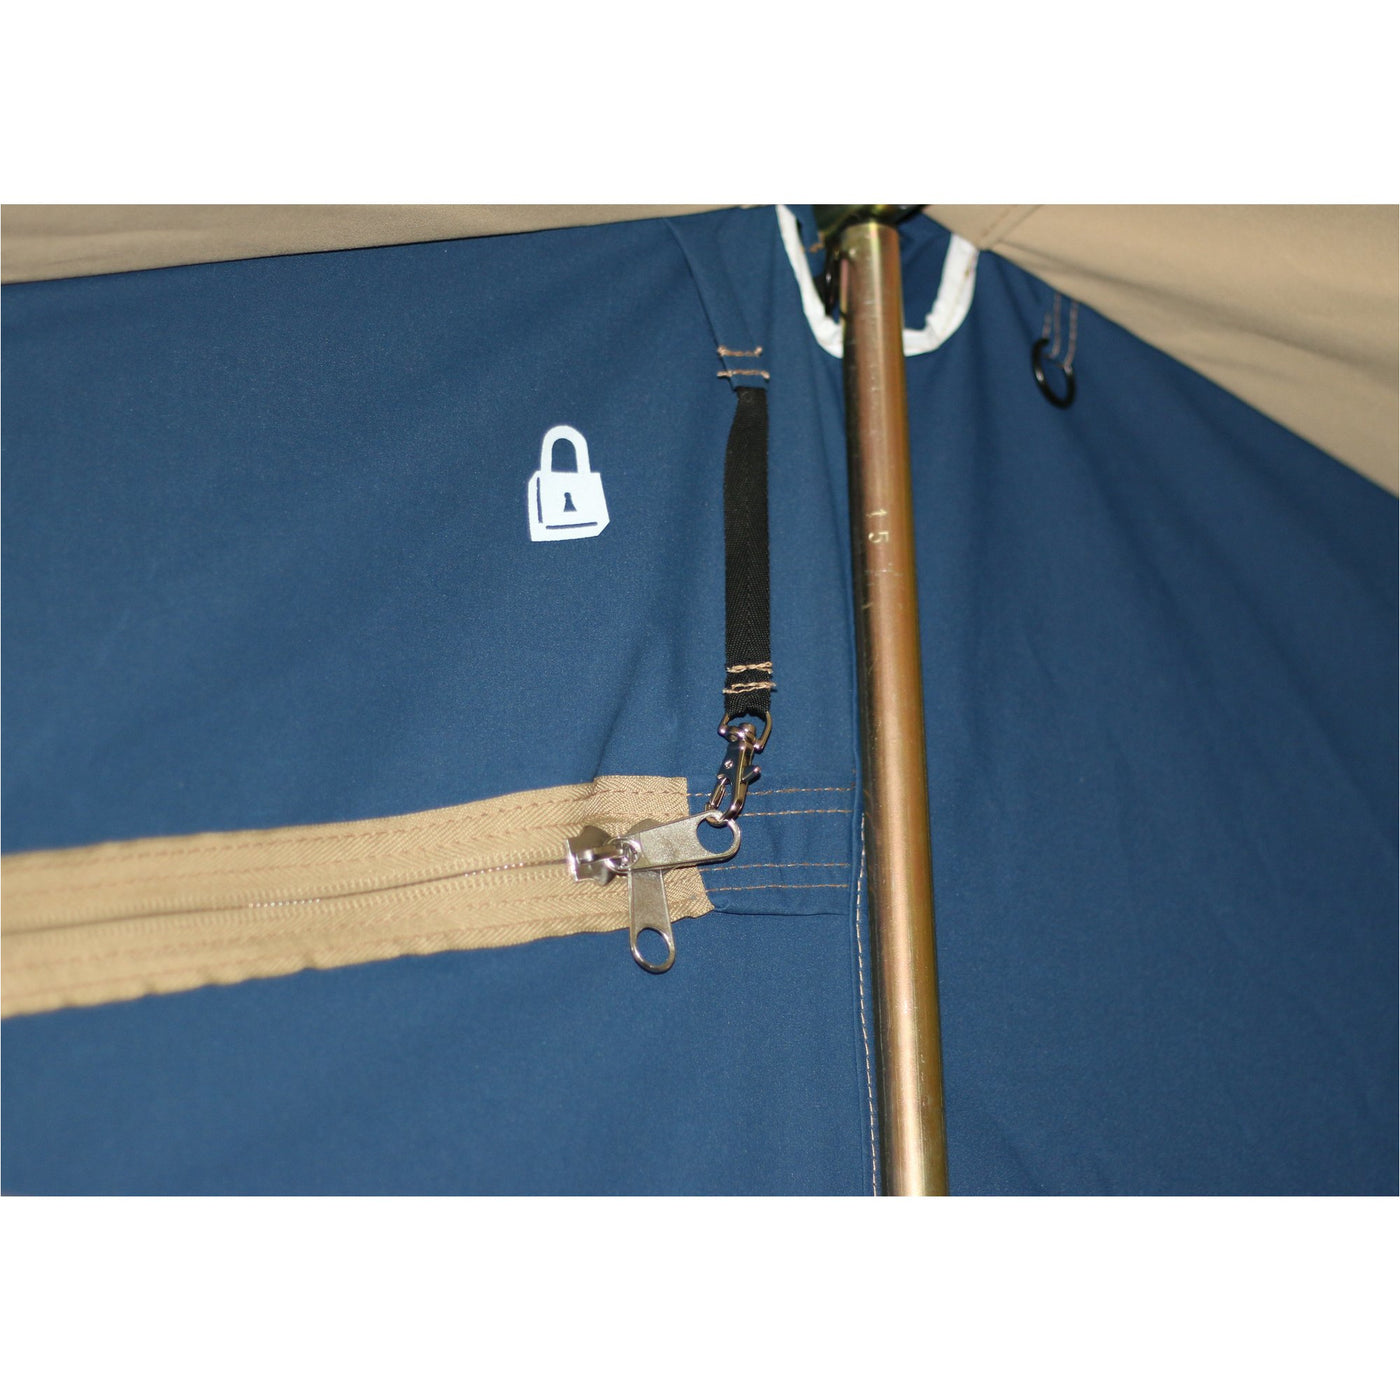 Lockable zips to keep children in, or intruders out!